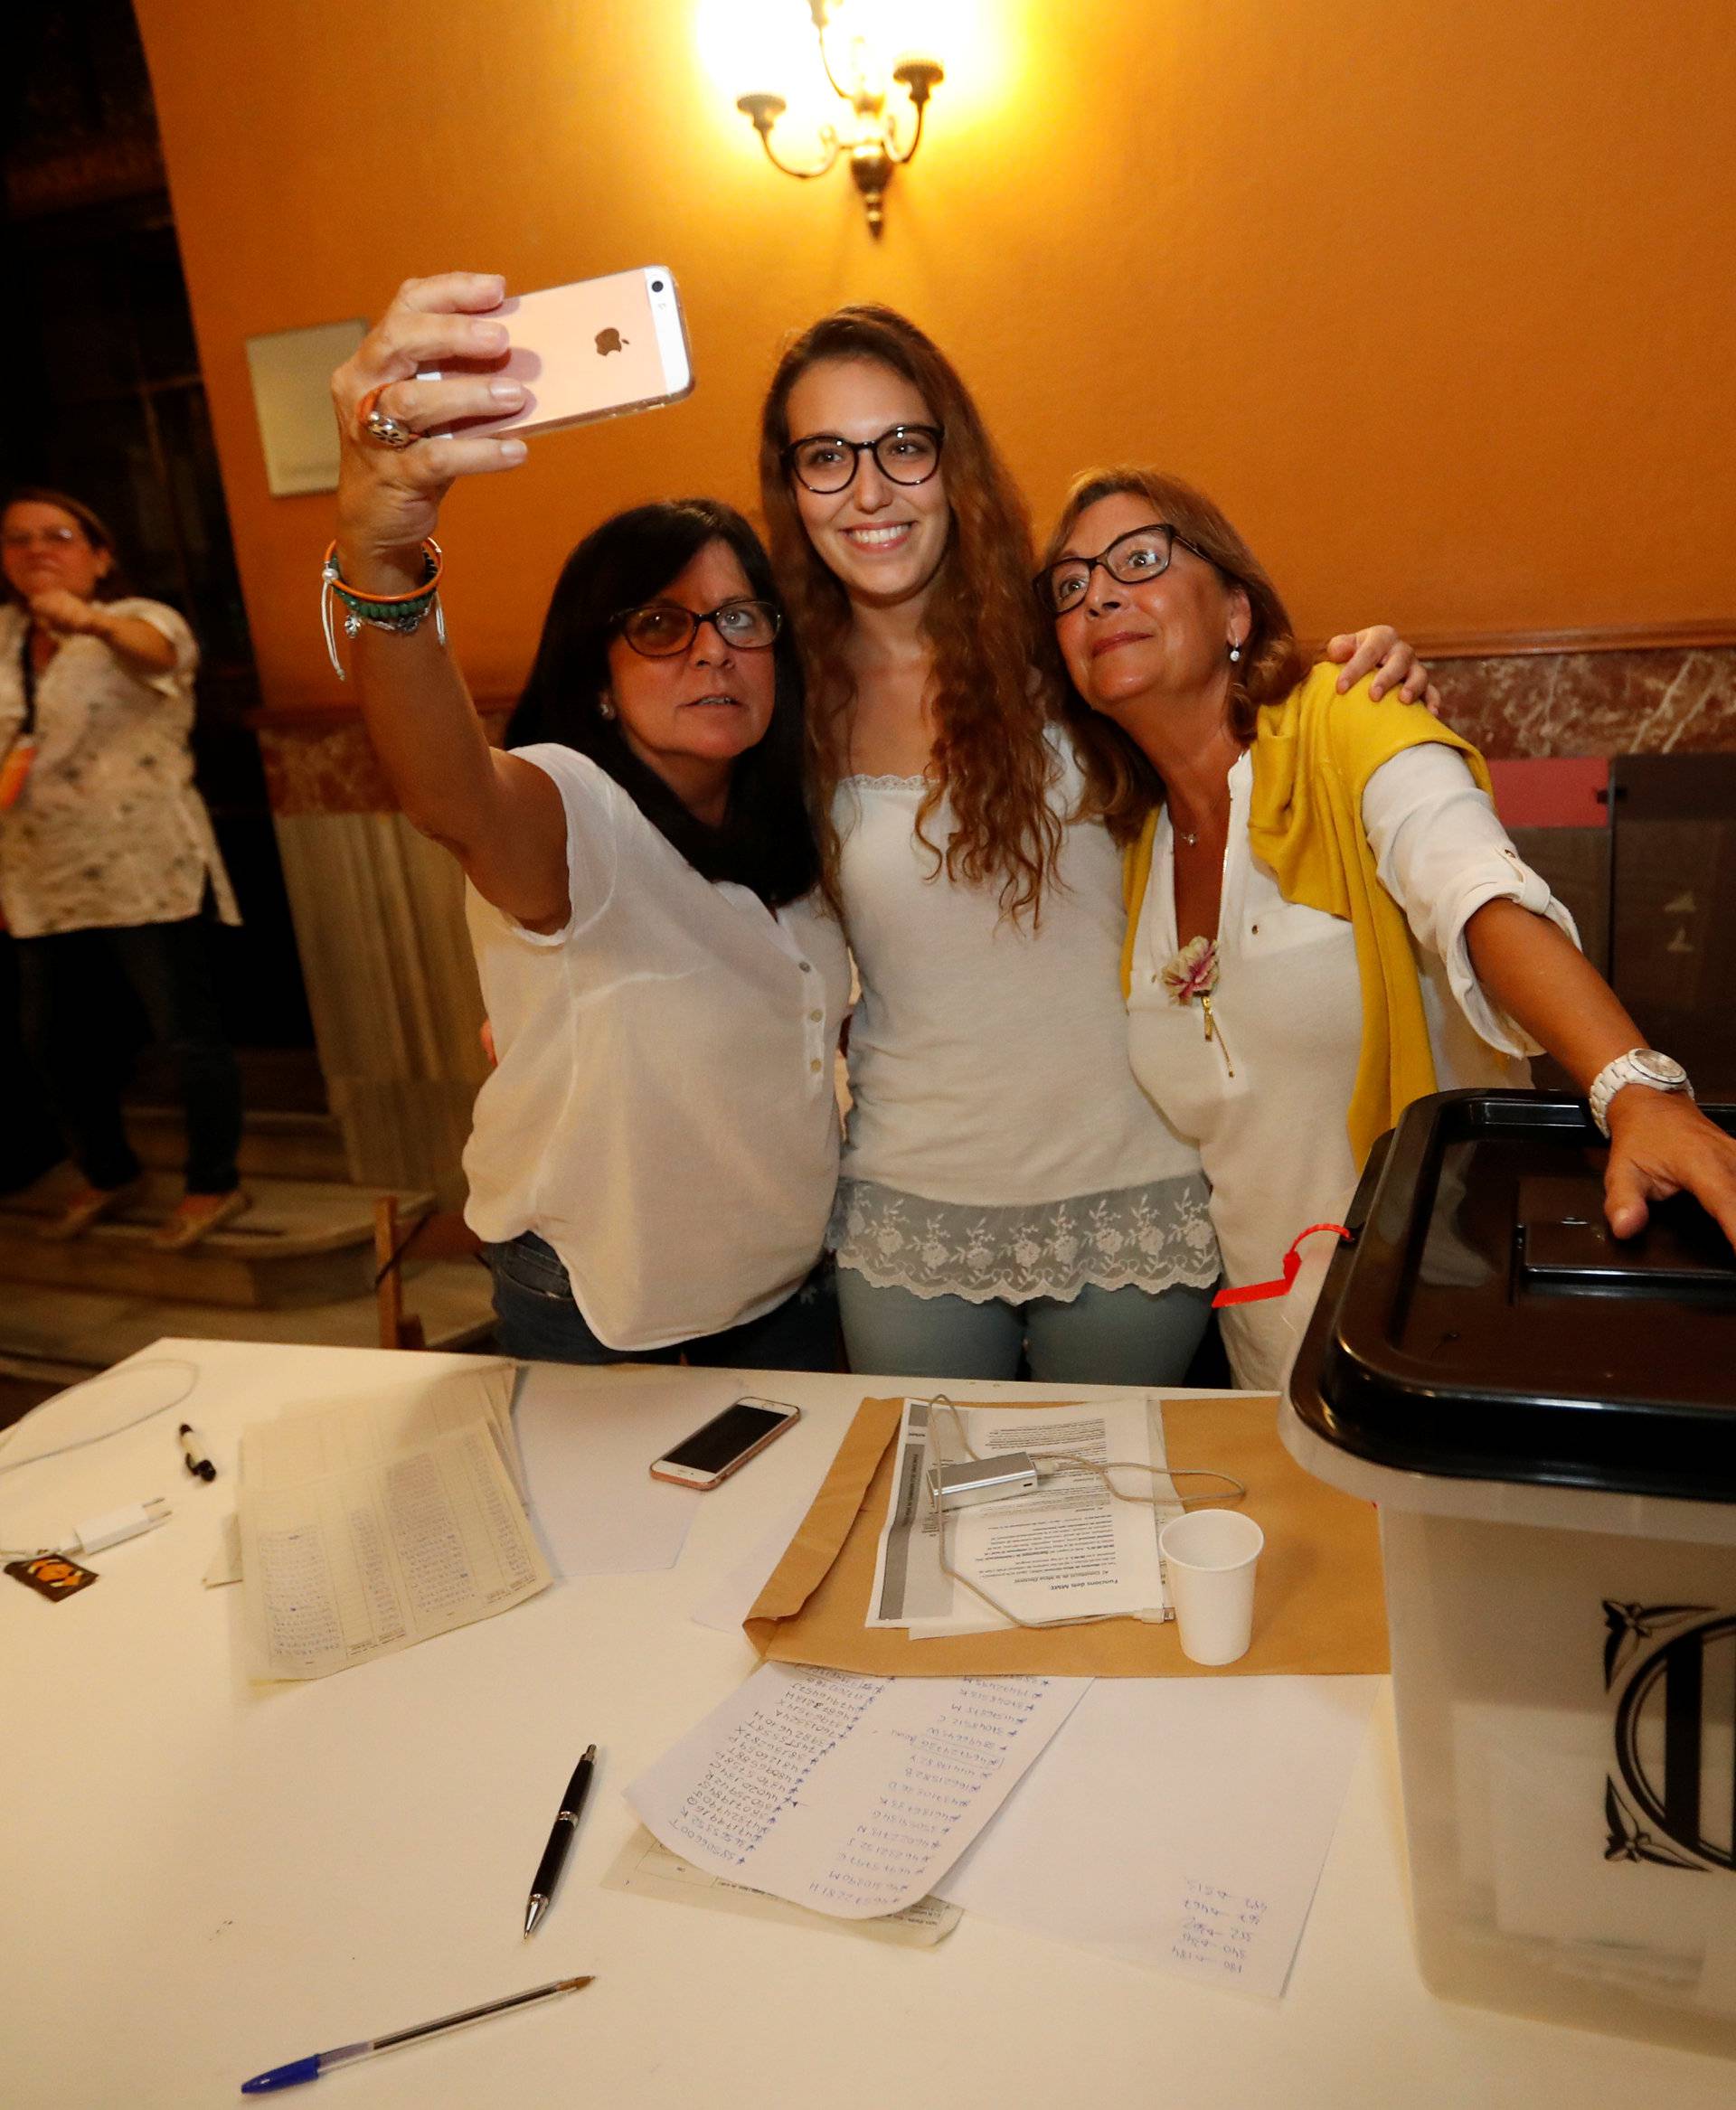  Polling station staff take a selfie as voting ended for the banned independence referendum in Barcelona